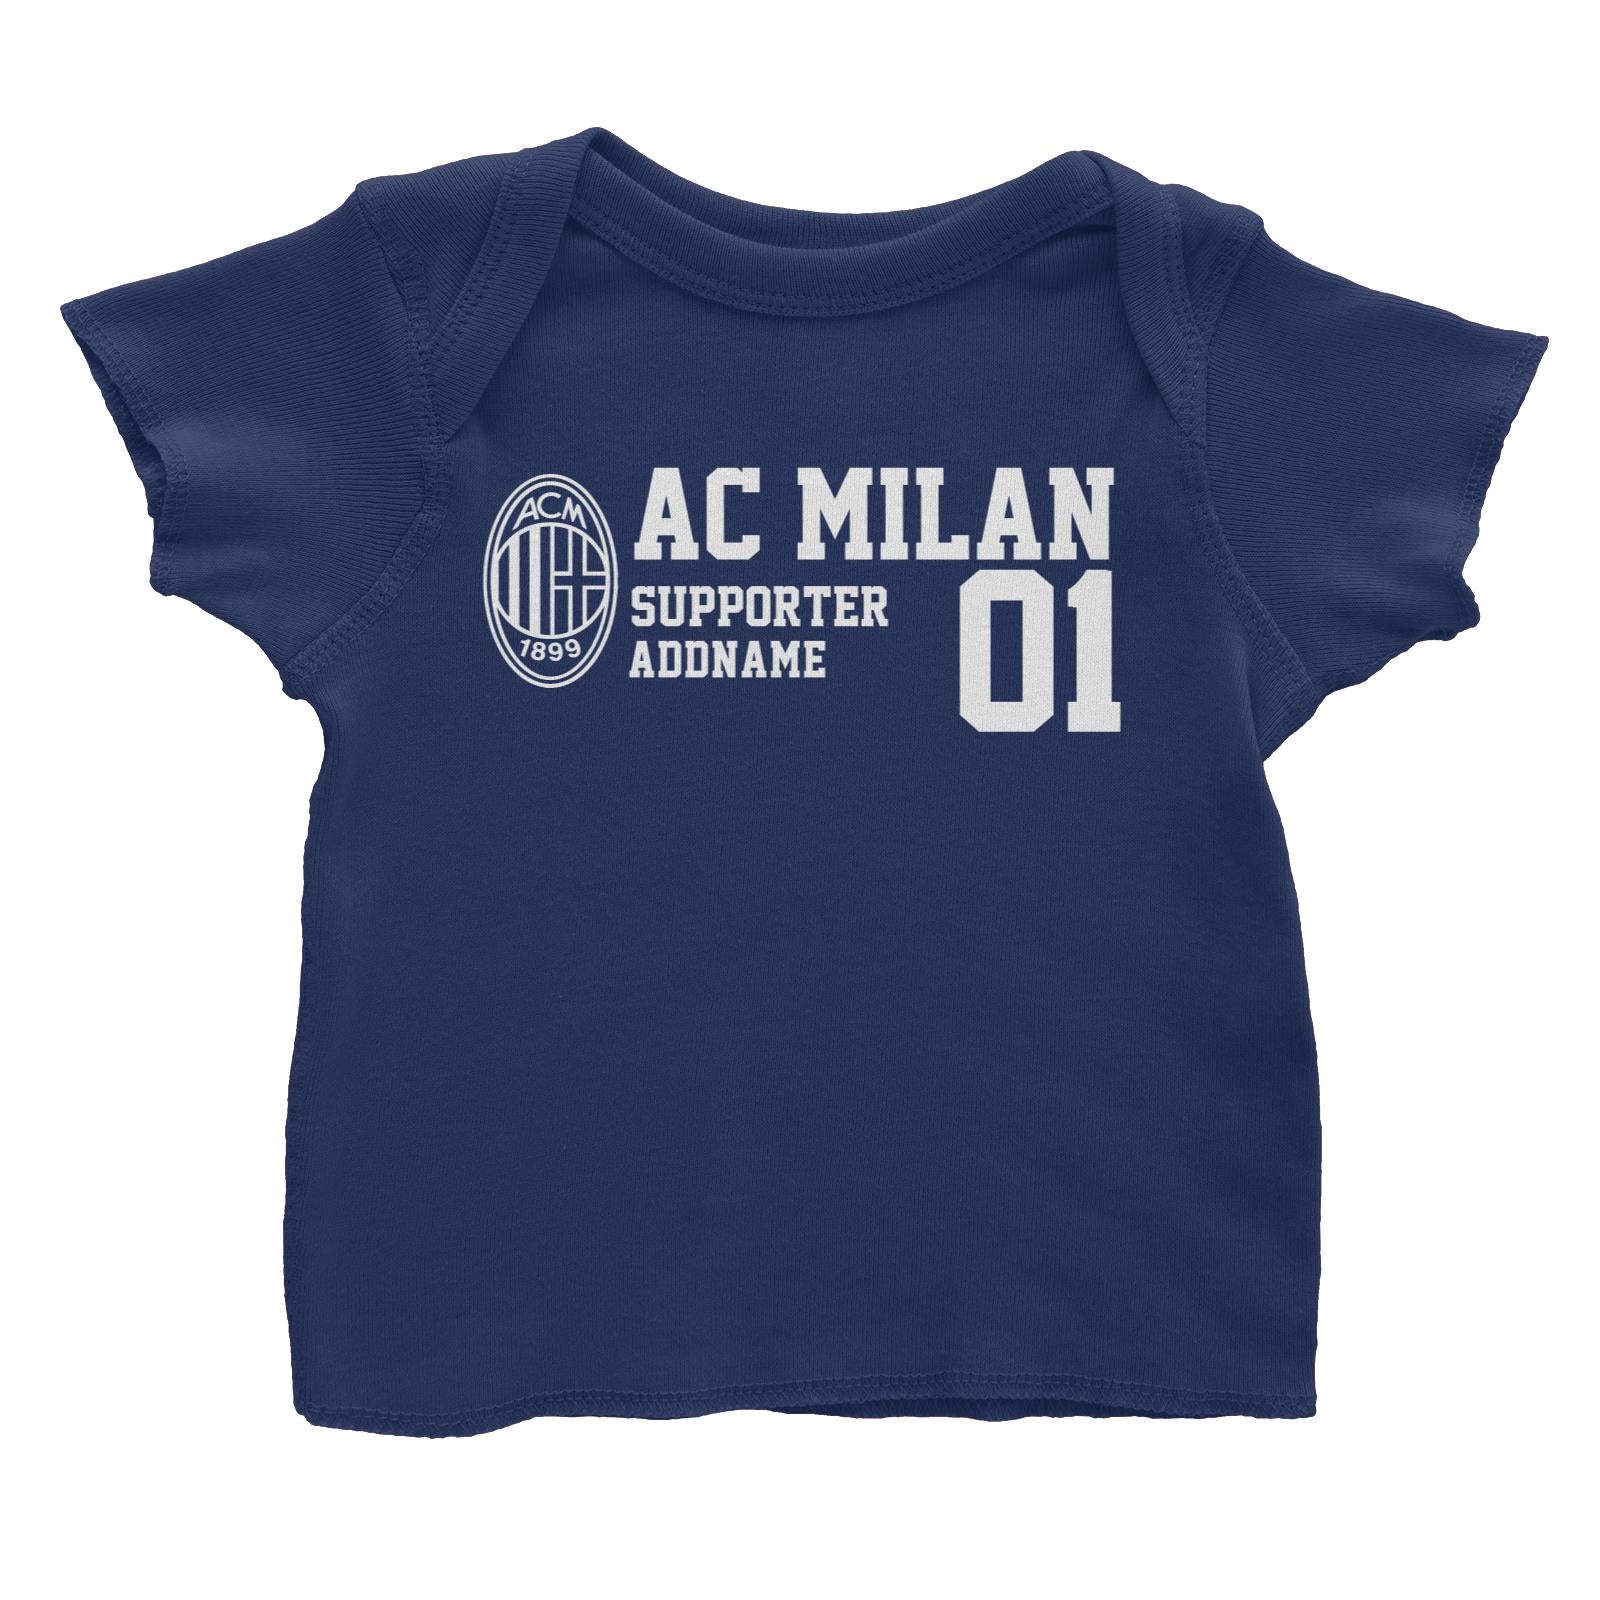 AC Milan Football Supporter Addname Baby T-Shirt